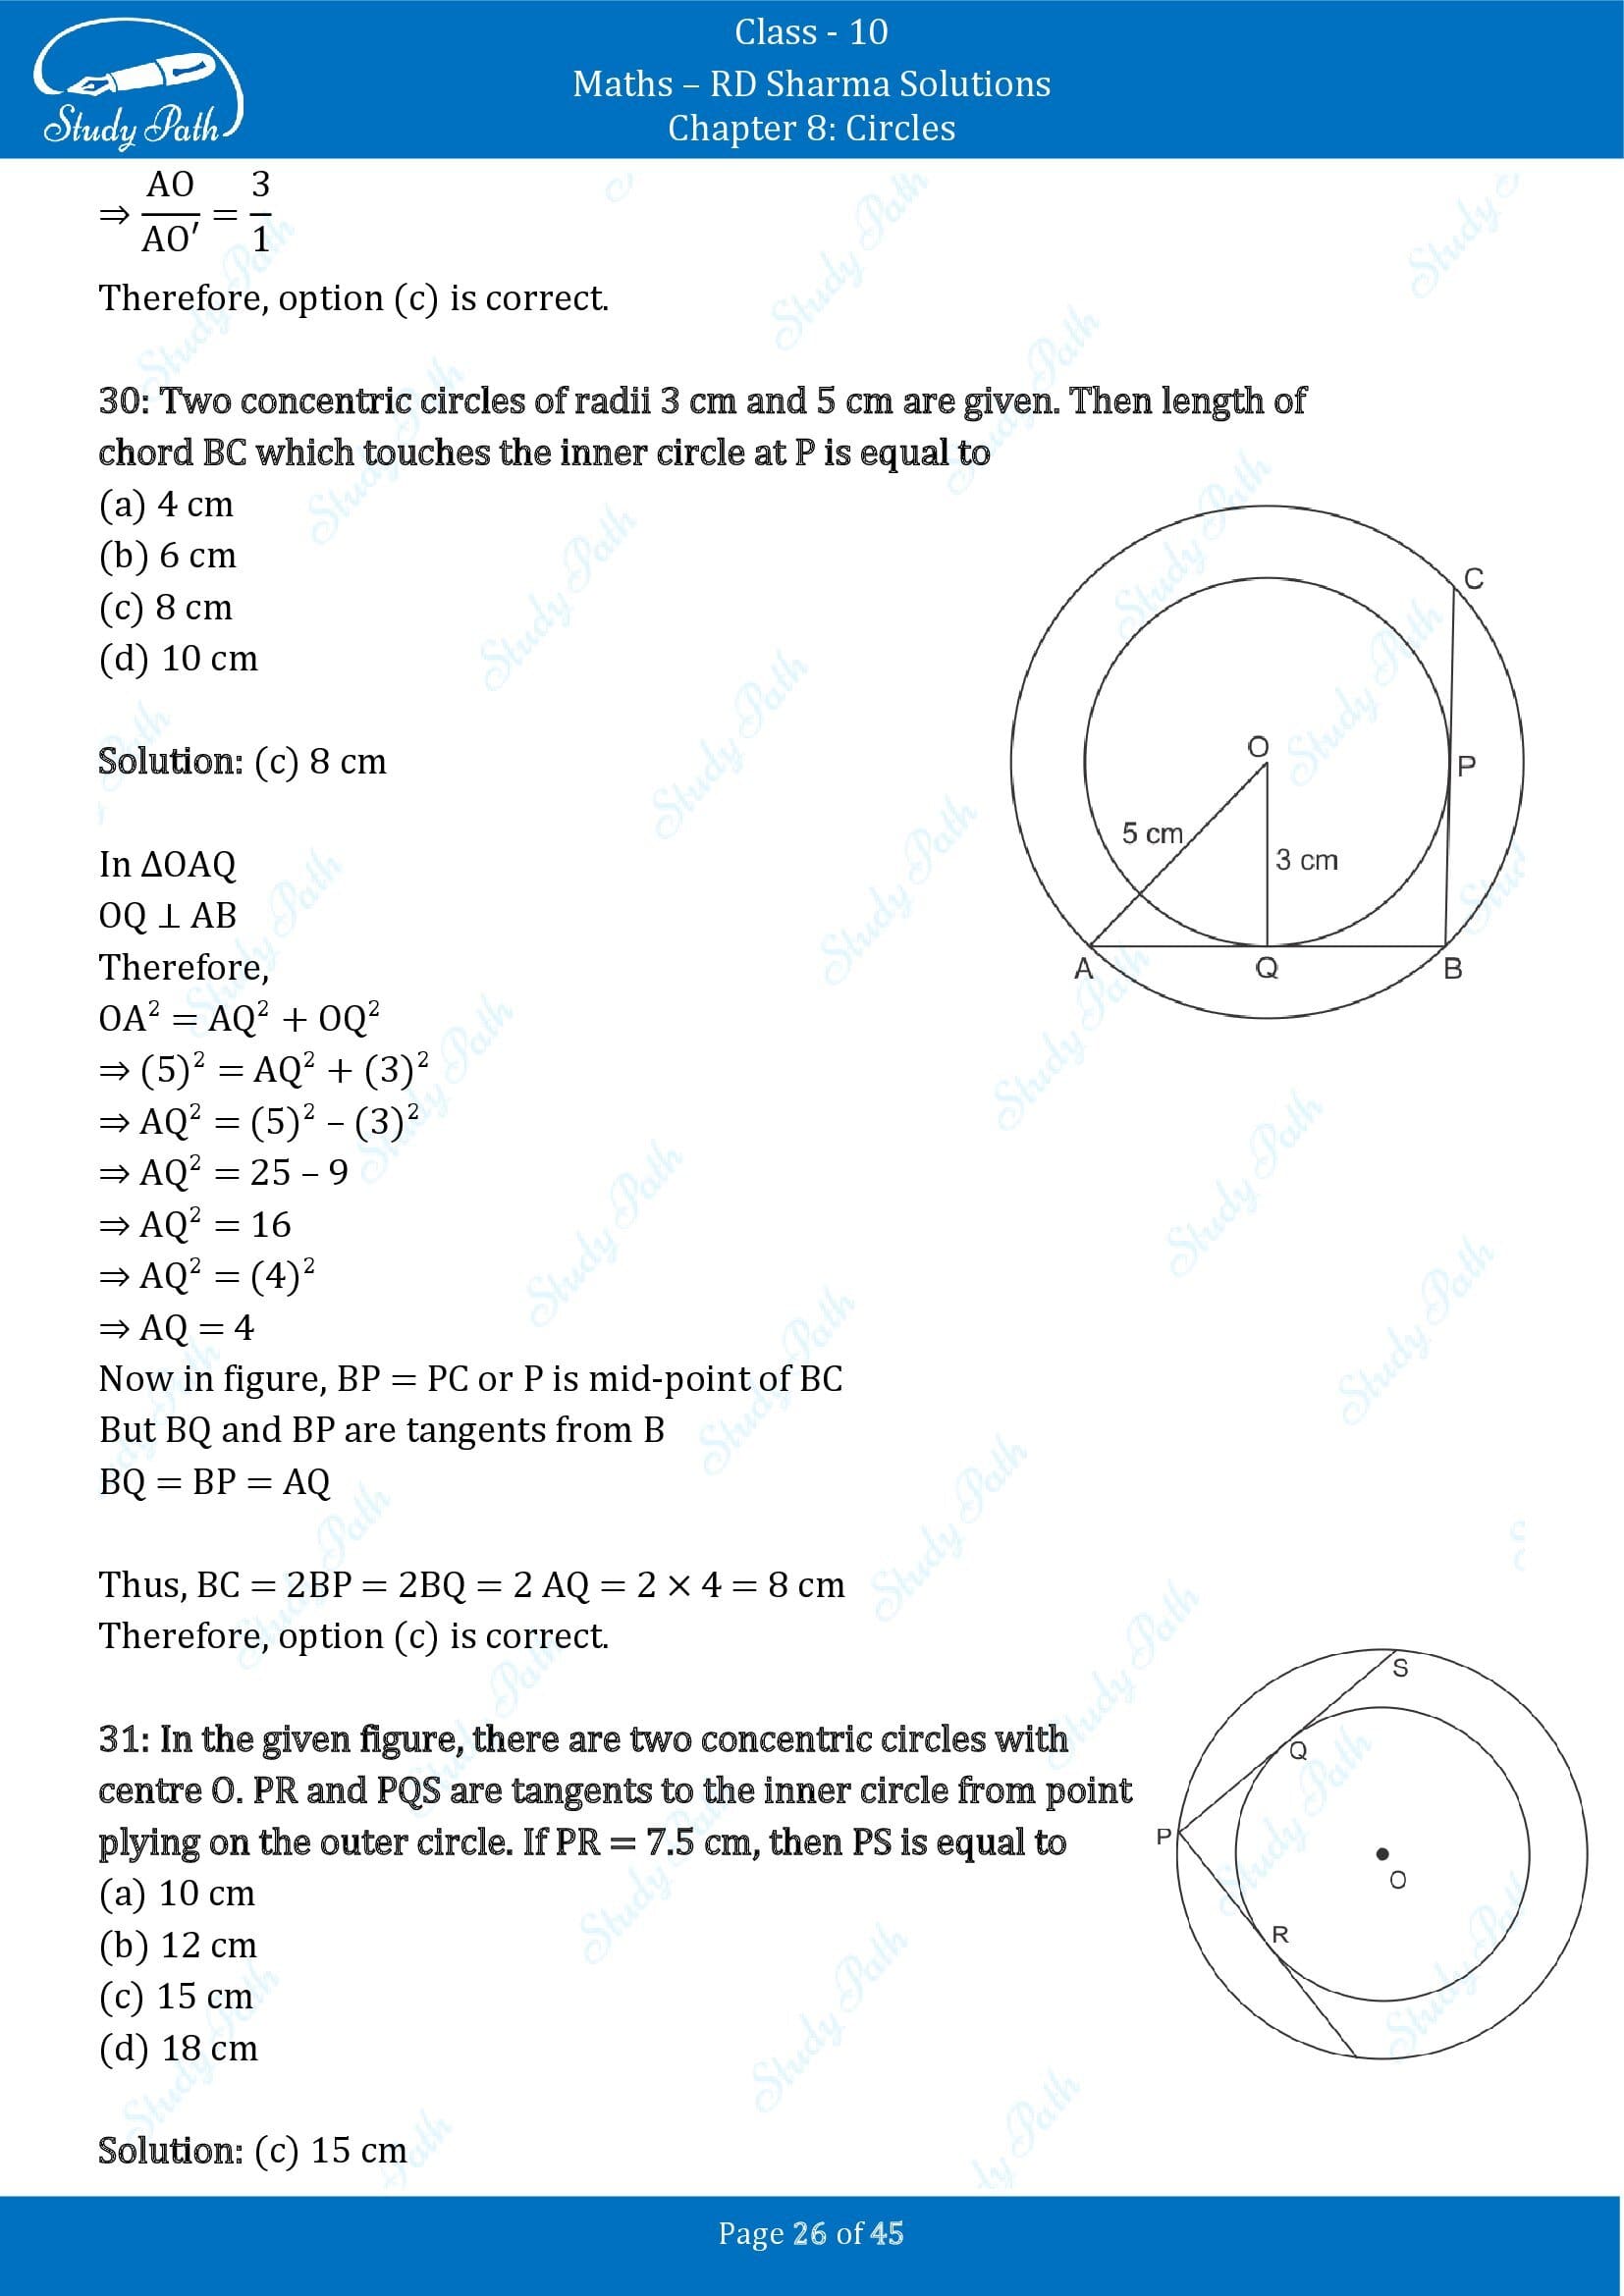 RD Sharma Solutions Class 10 Chapter 8 Circles Multiple Choice Questions MCQs 00026